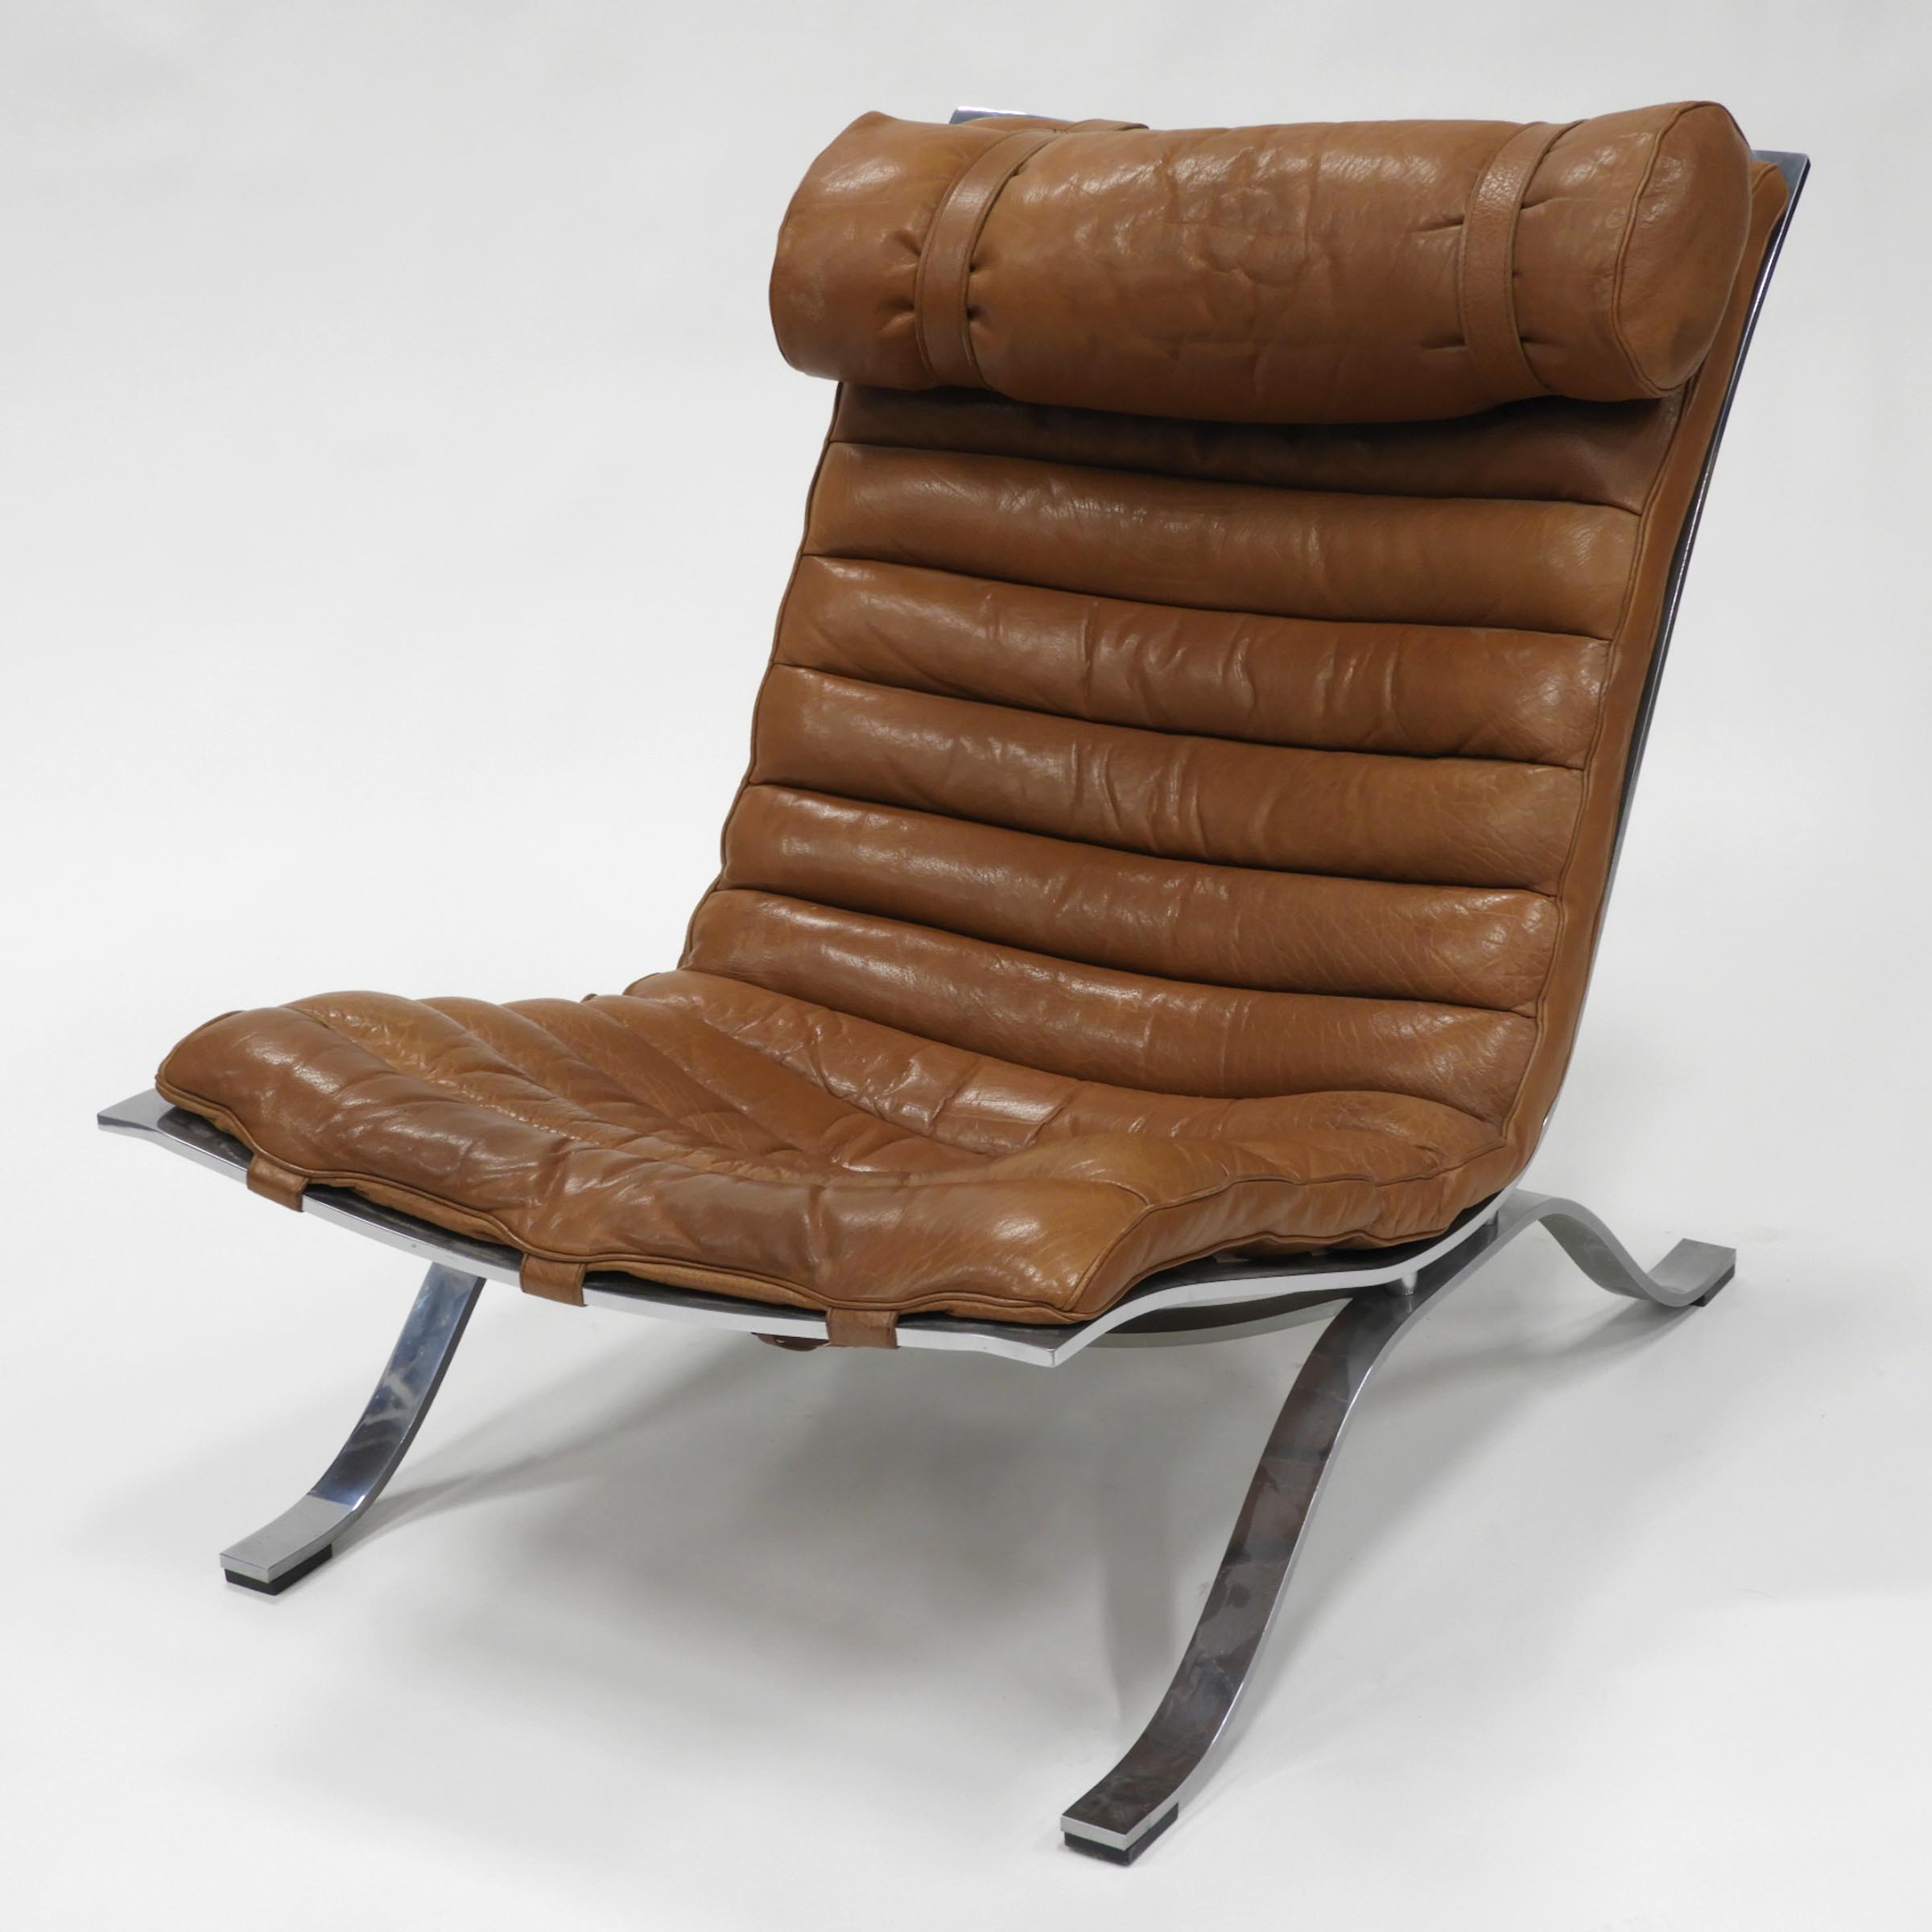 Arne Norrell for Norell Möbel AB 'Ari' Lounge Chair, Sweden, 1966